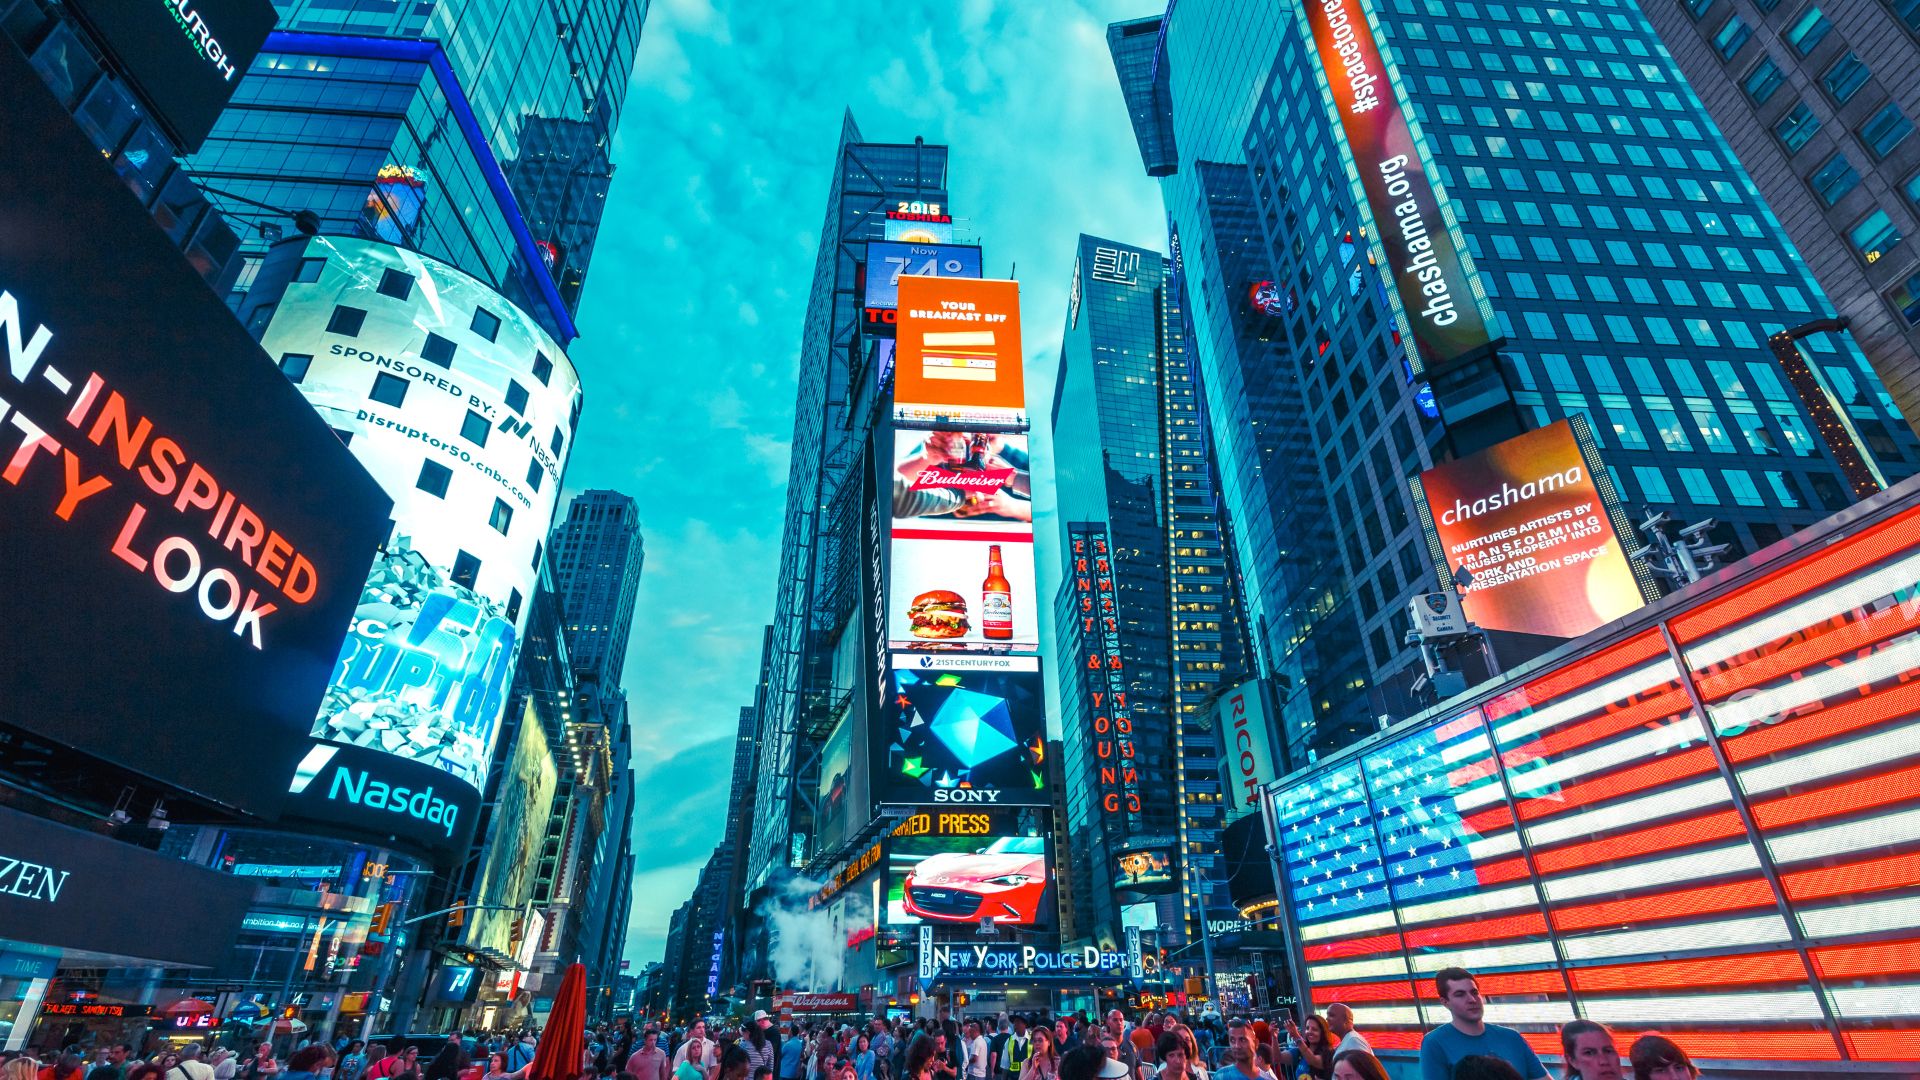 Time Square Image About Traditional Marketing or Digital Marketing